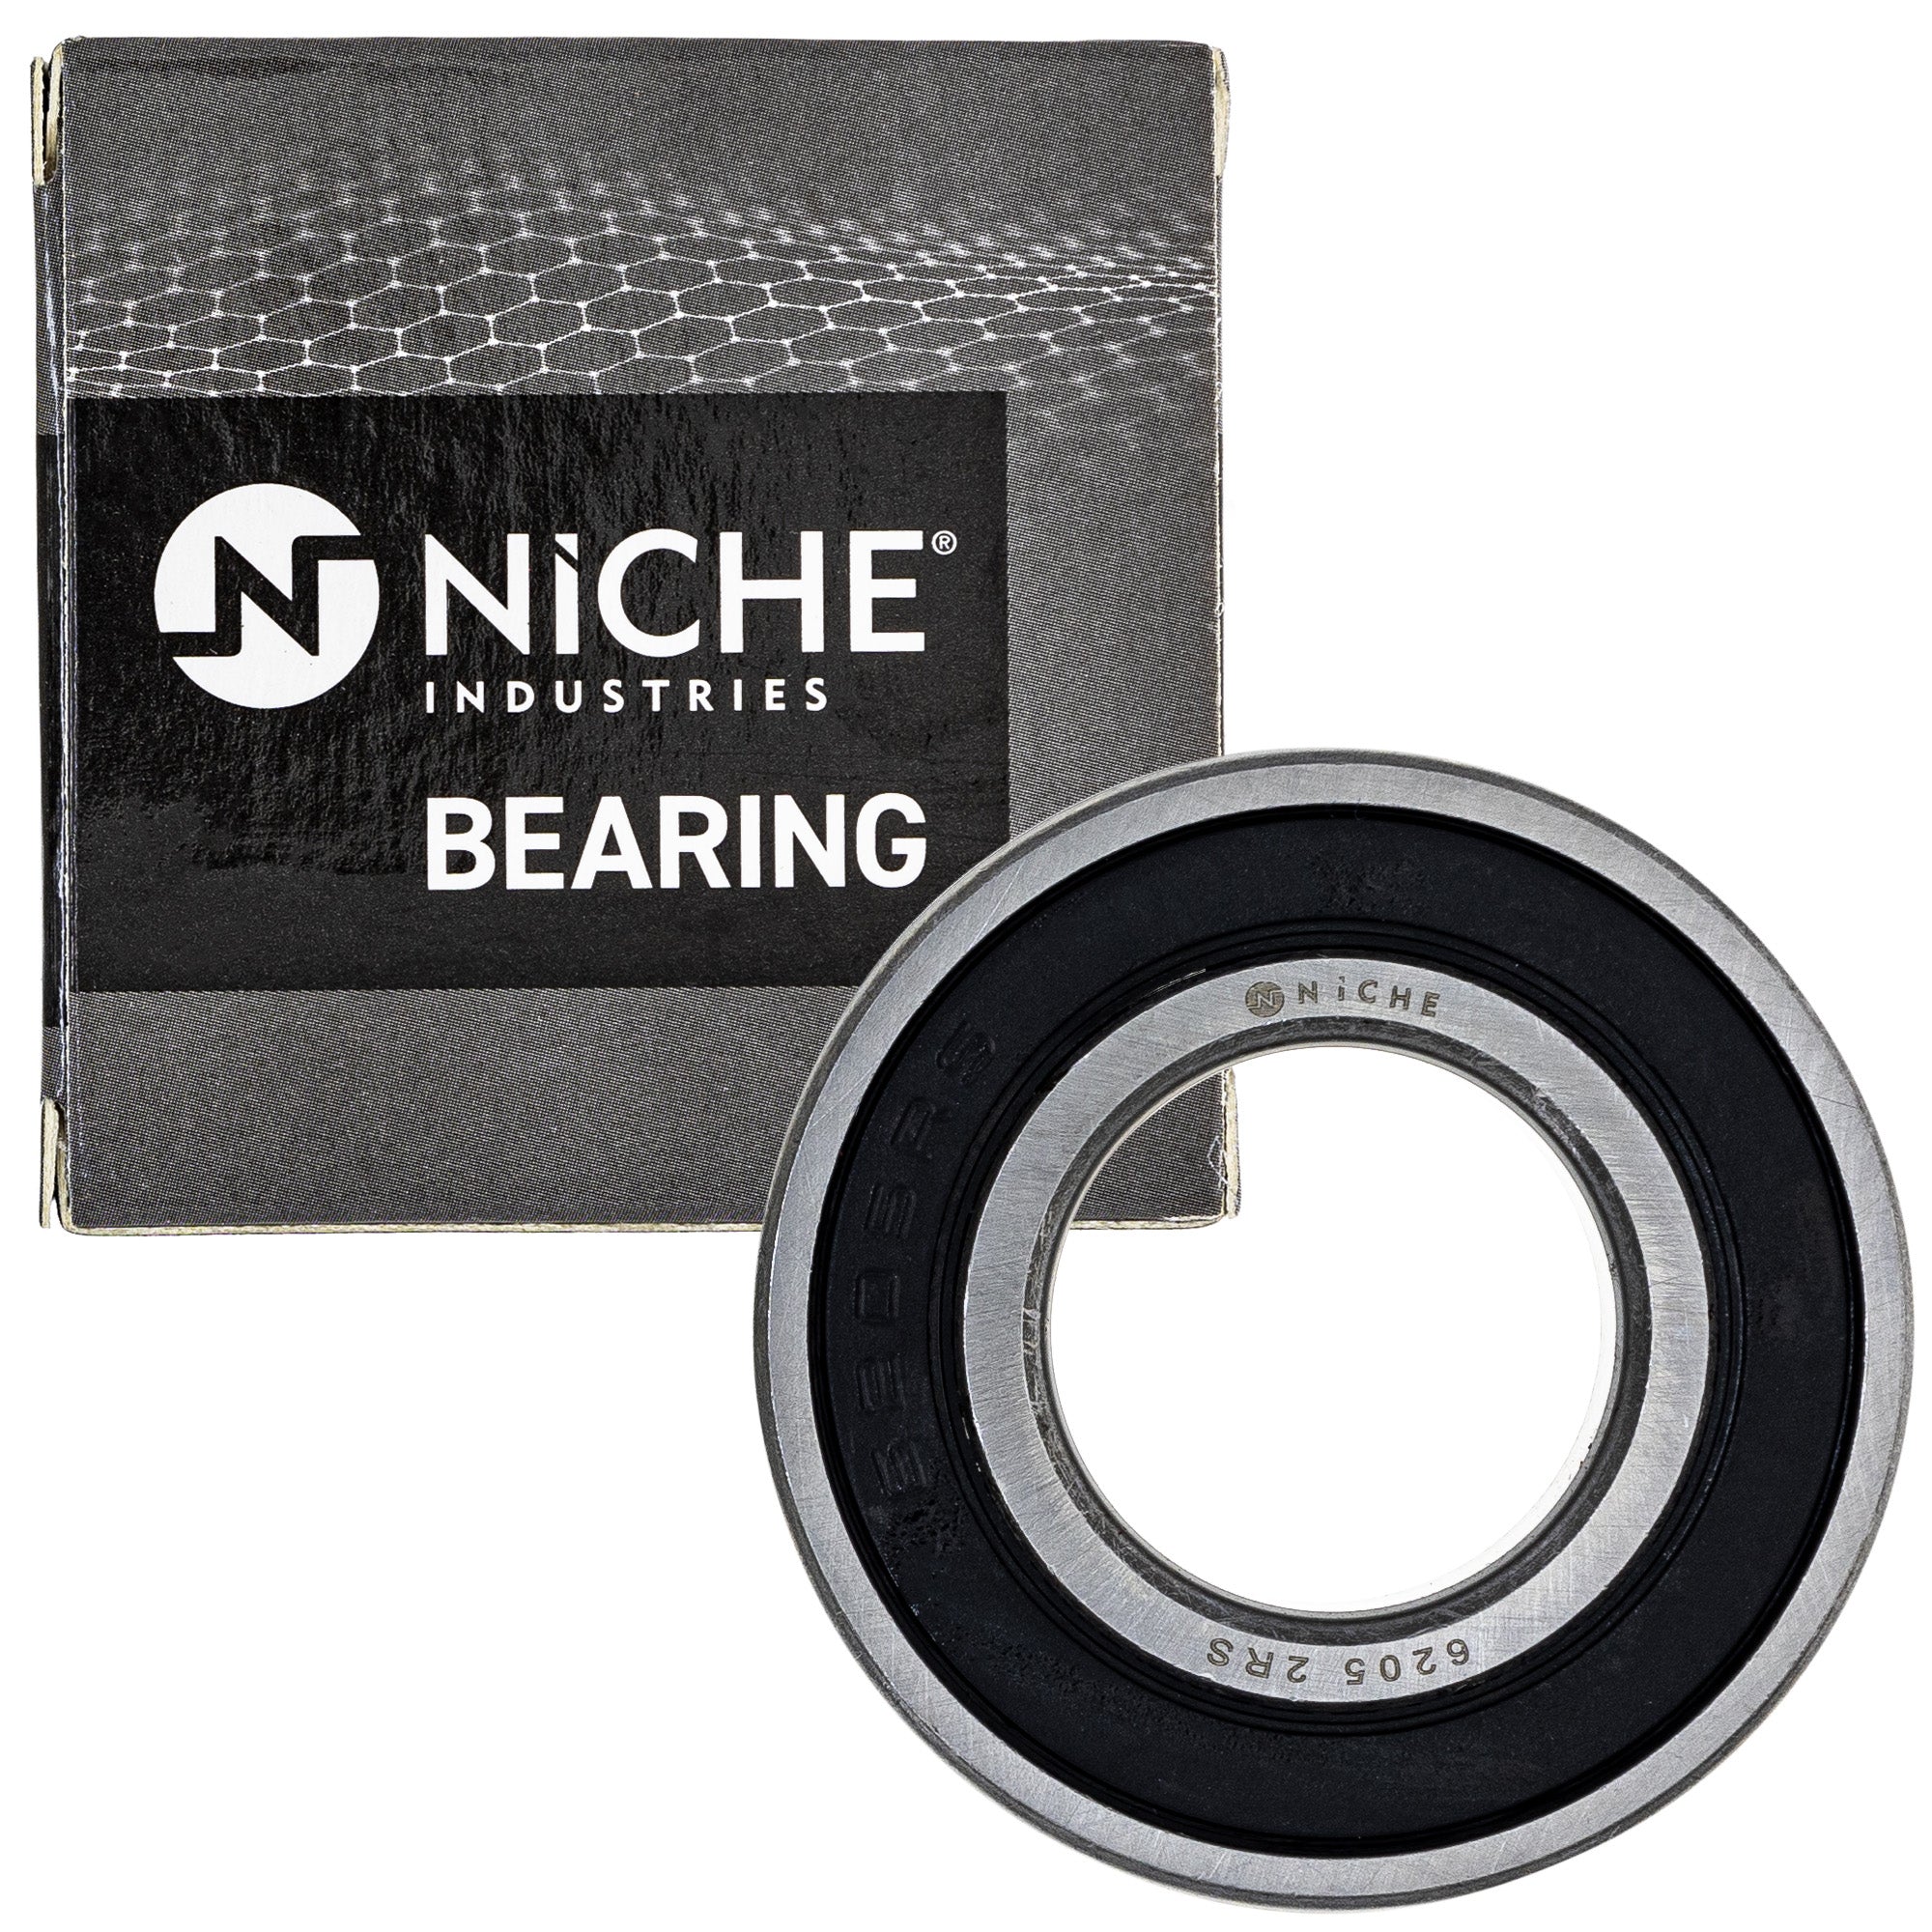 NICHE MK1009139 Wheel Bearing Seal Kit for zOTHER Ref No KH400